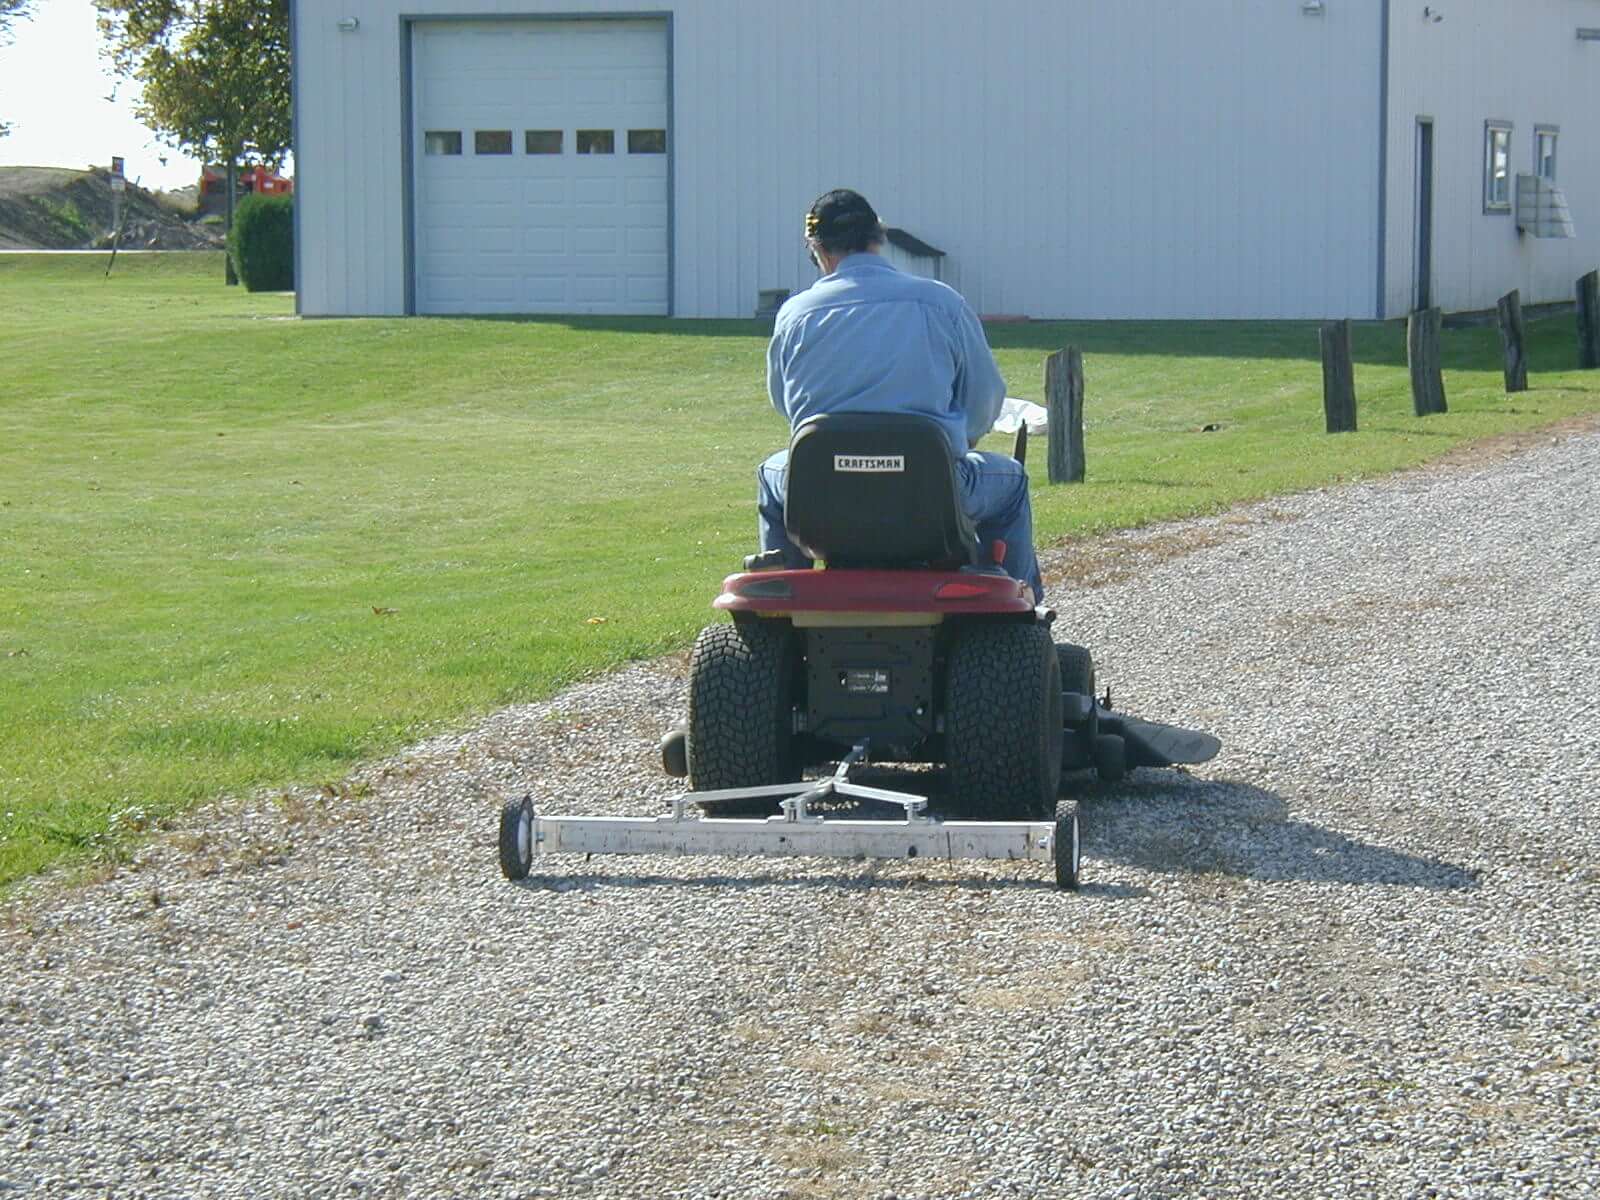 Easily rolls over grass, gravel or pavement